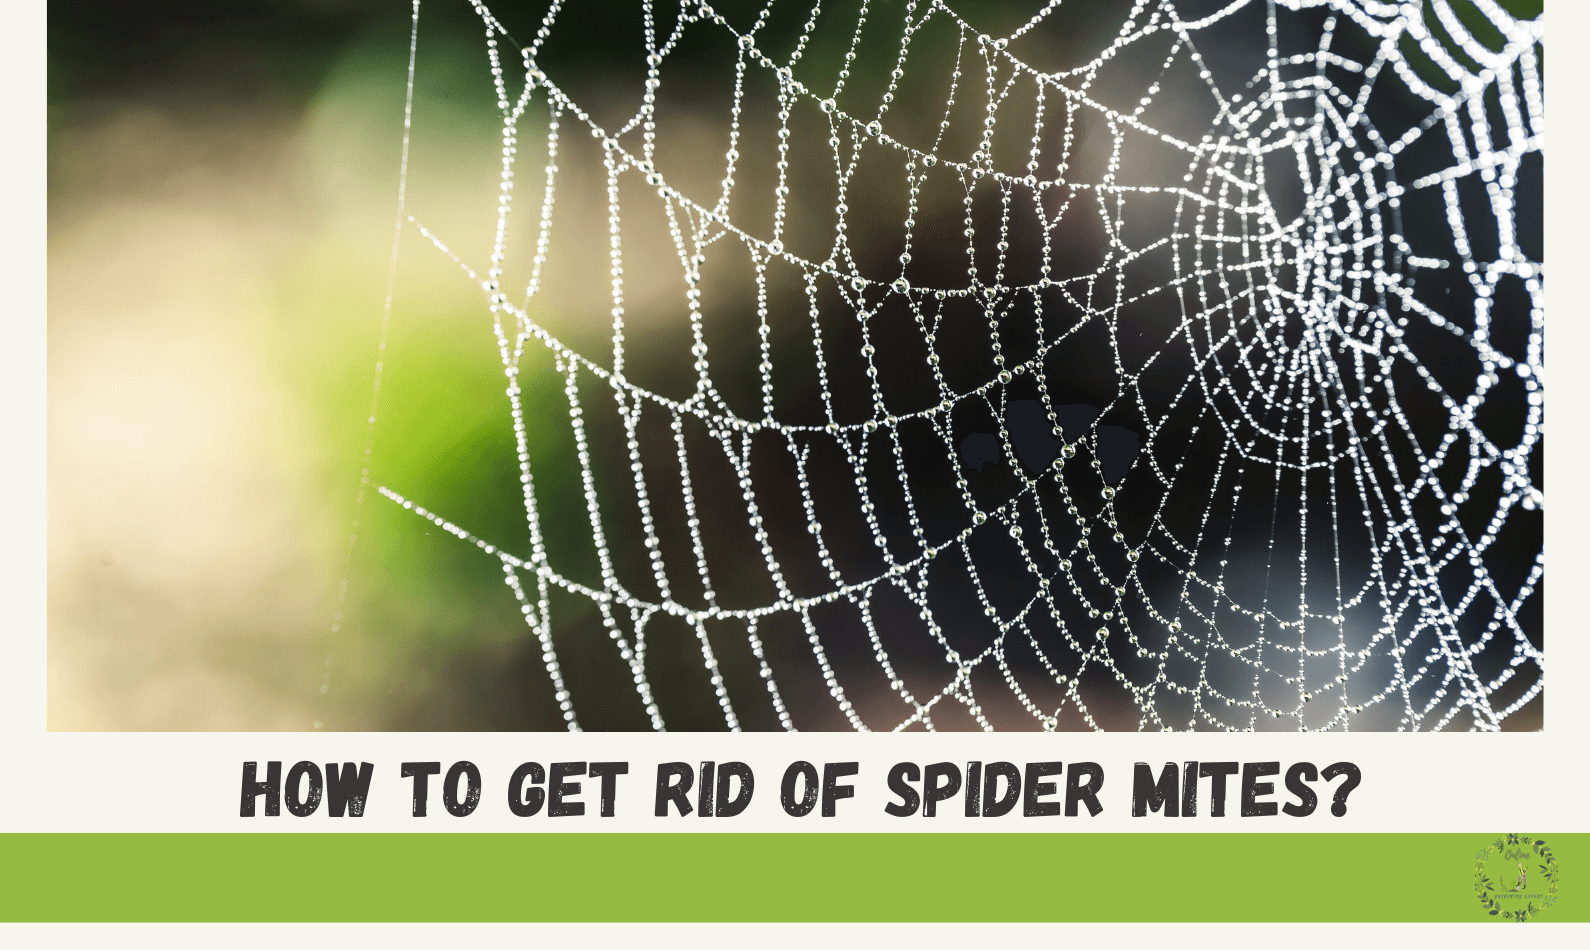 How to get rid of spider mites